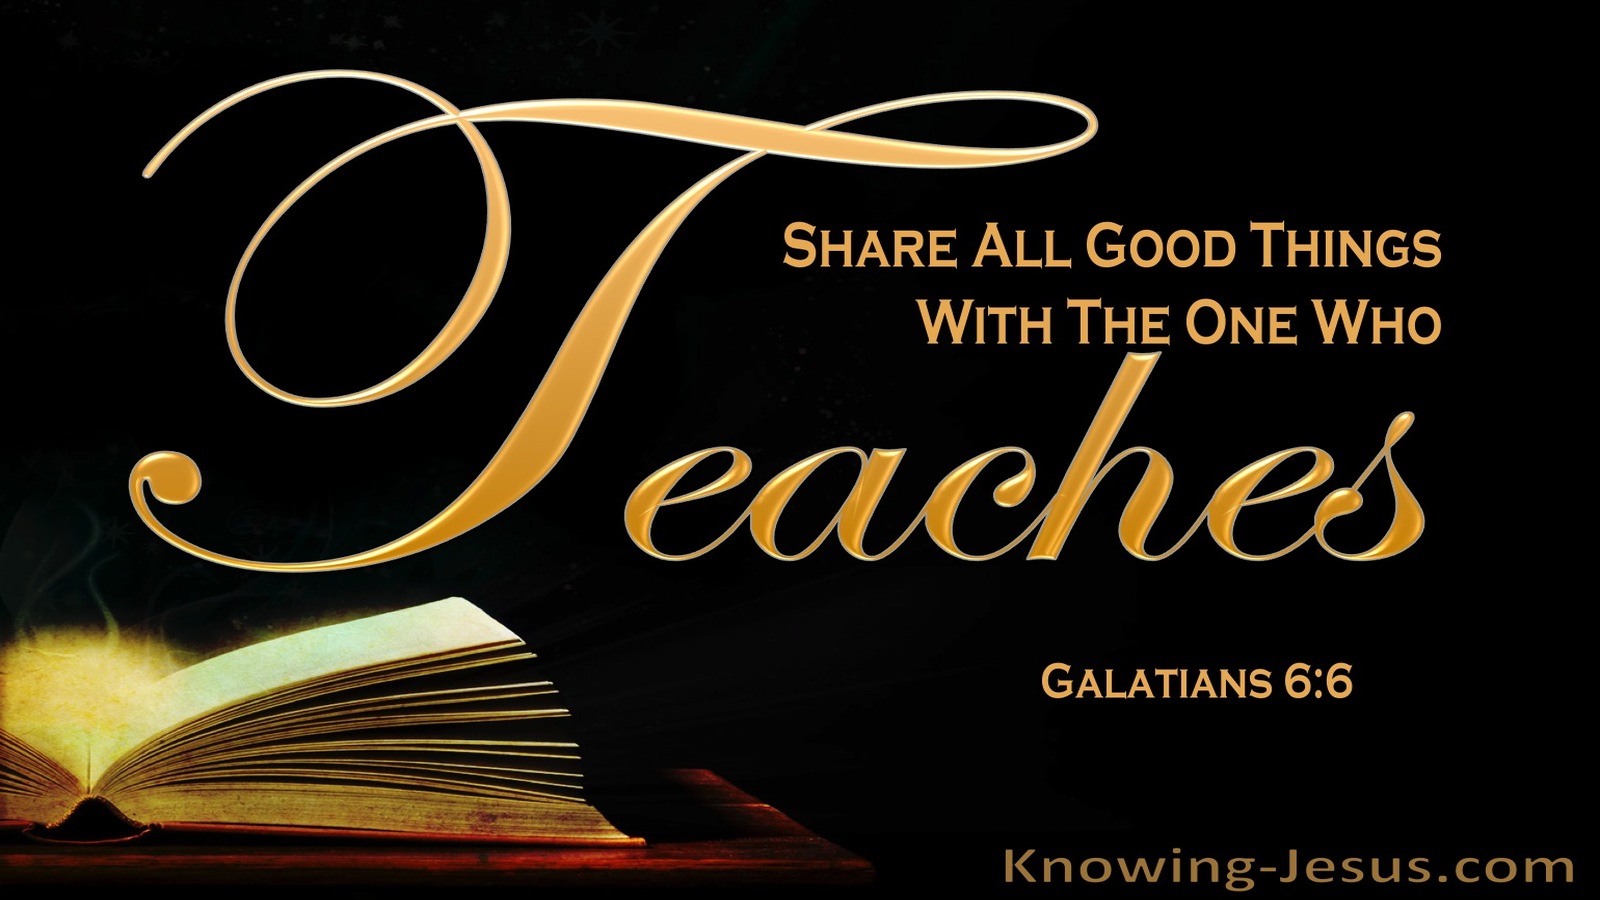 Galatians 6:6 Share All Foog Things With The One Who Teaches (yellow)